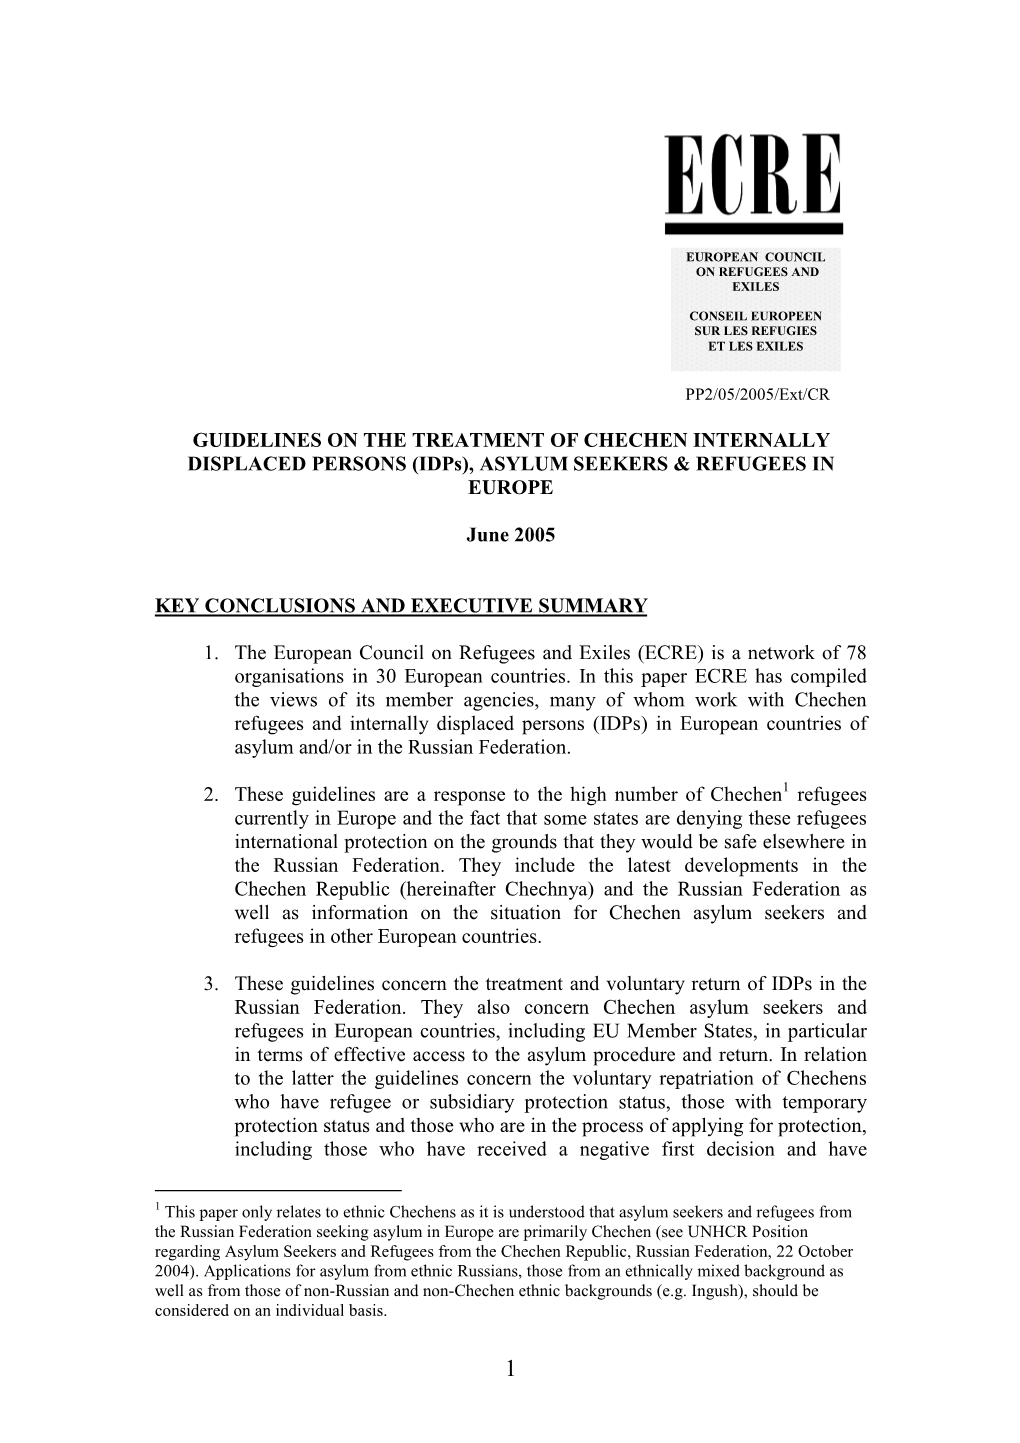 Guidelines on the Treatment of Chechen Refugees